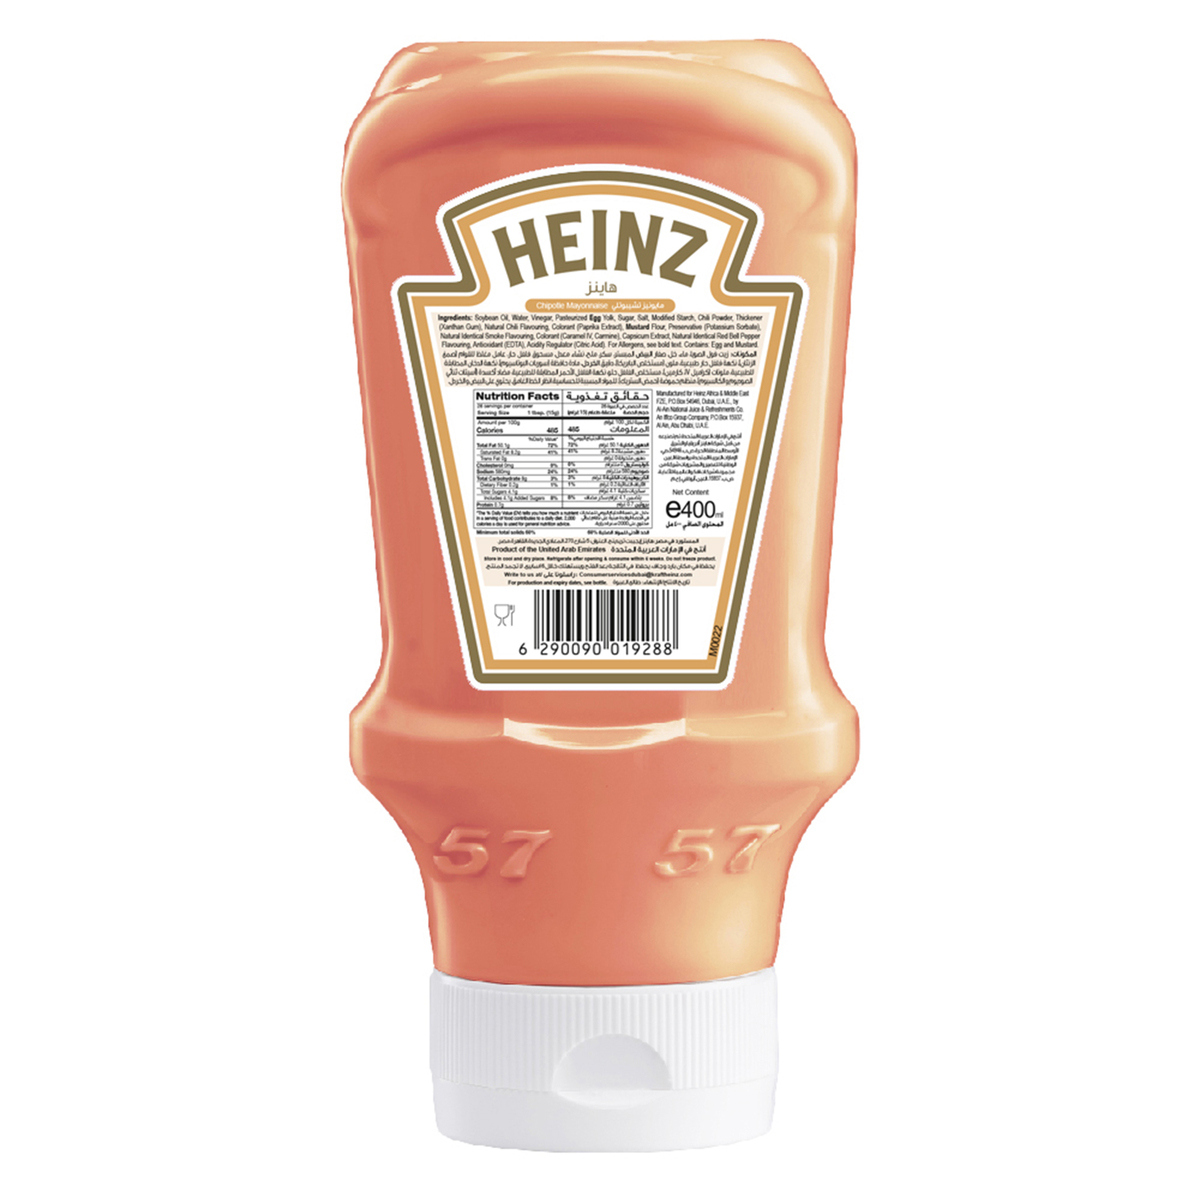 Heinz Chipotle Mayonnaise Top Down Squeezy Bottle 400 ml